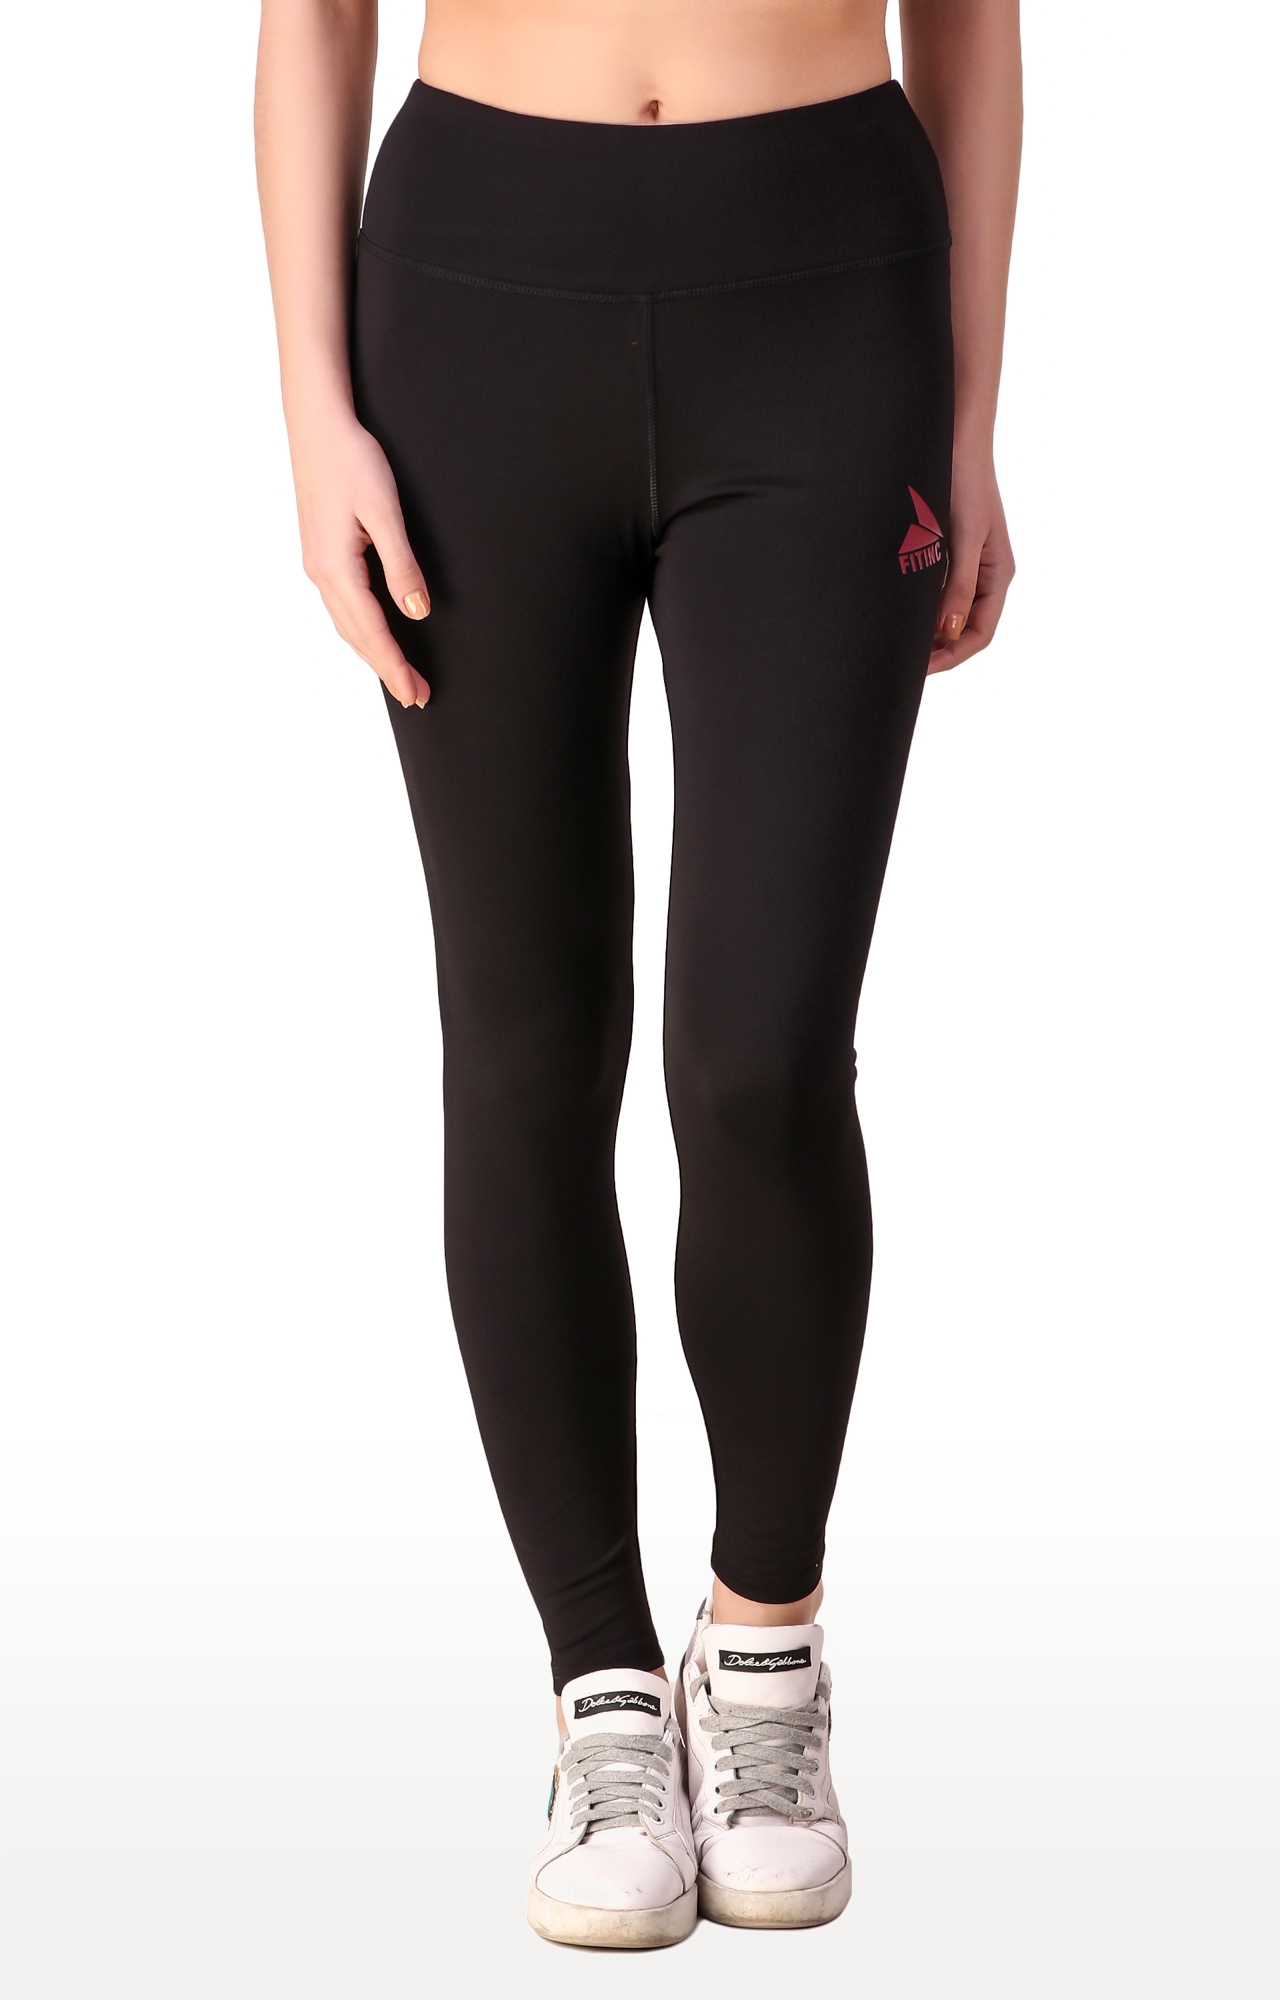 Women's Black Polyester Solid Tights